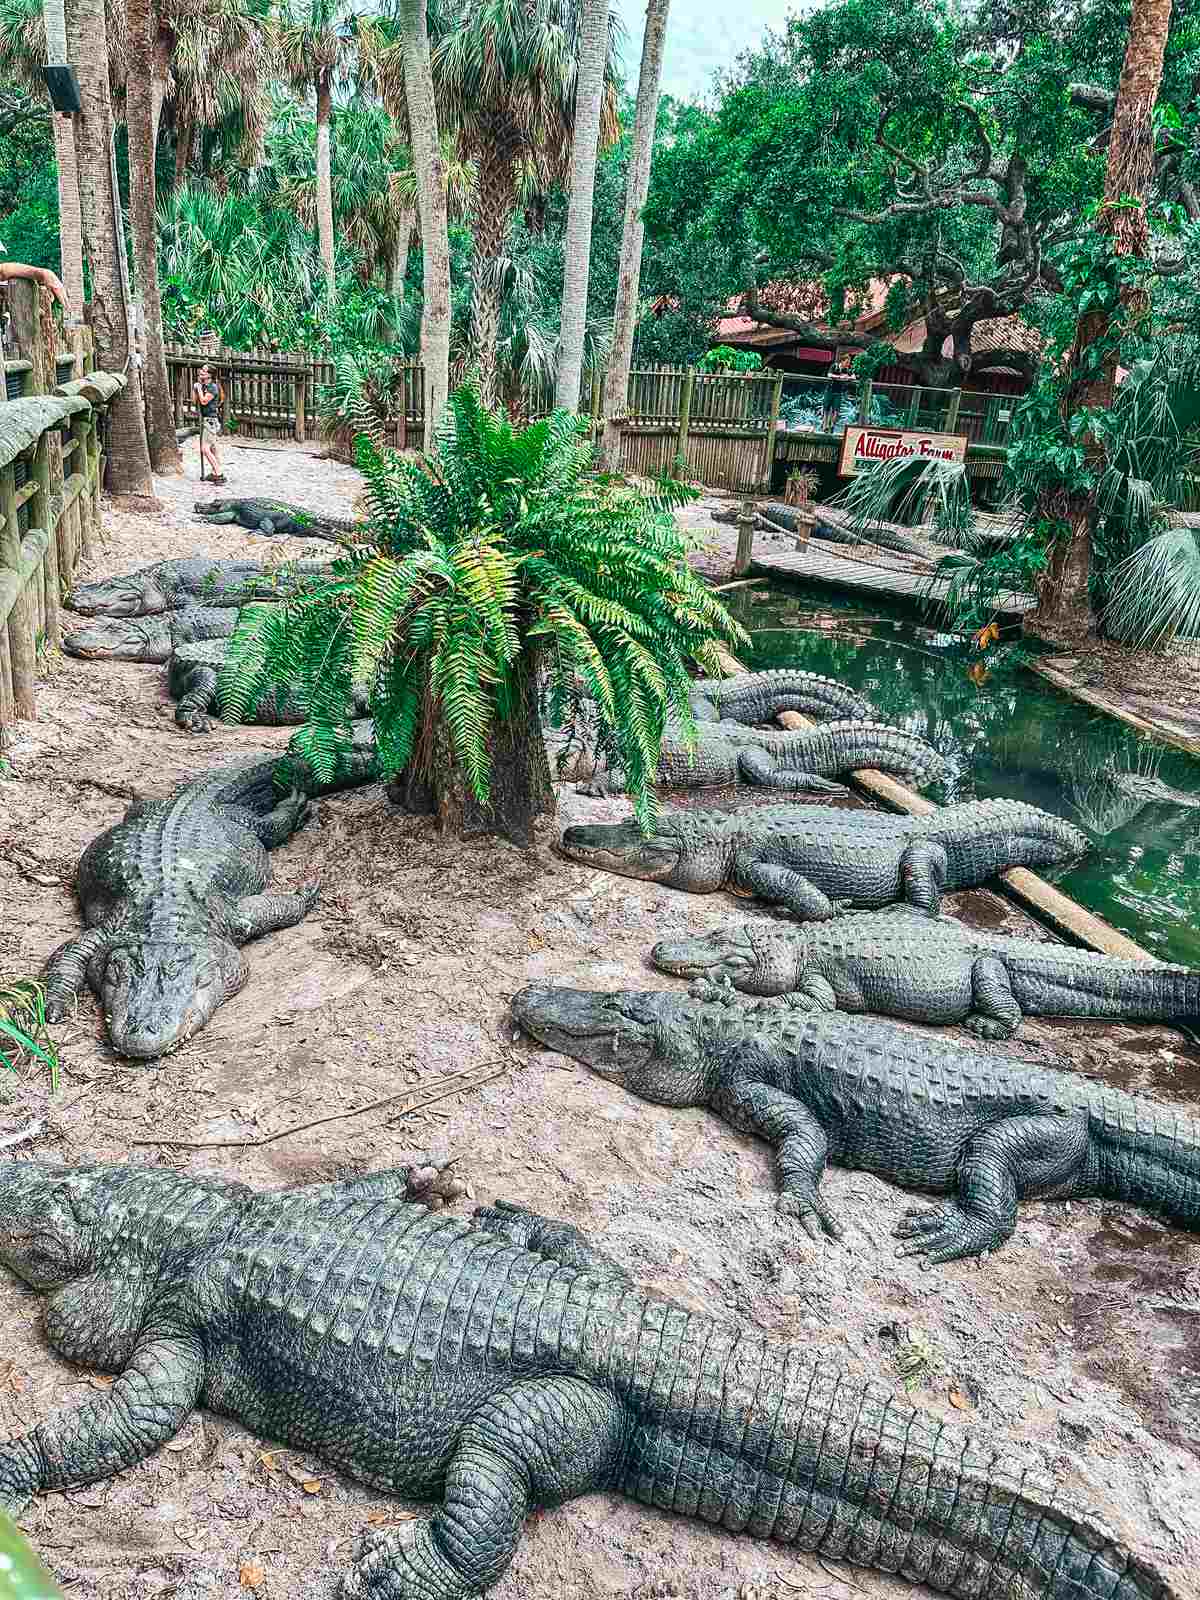 large alligators in alligator farm when you spend a Weekend in St. Augustine